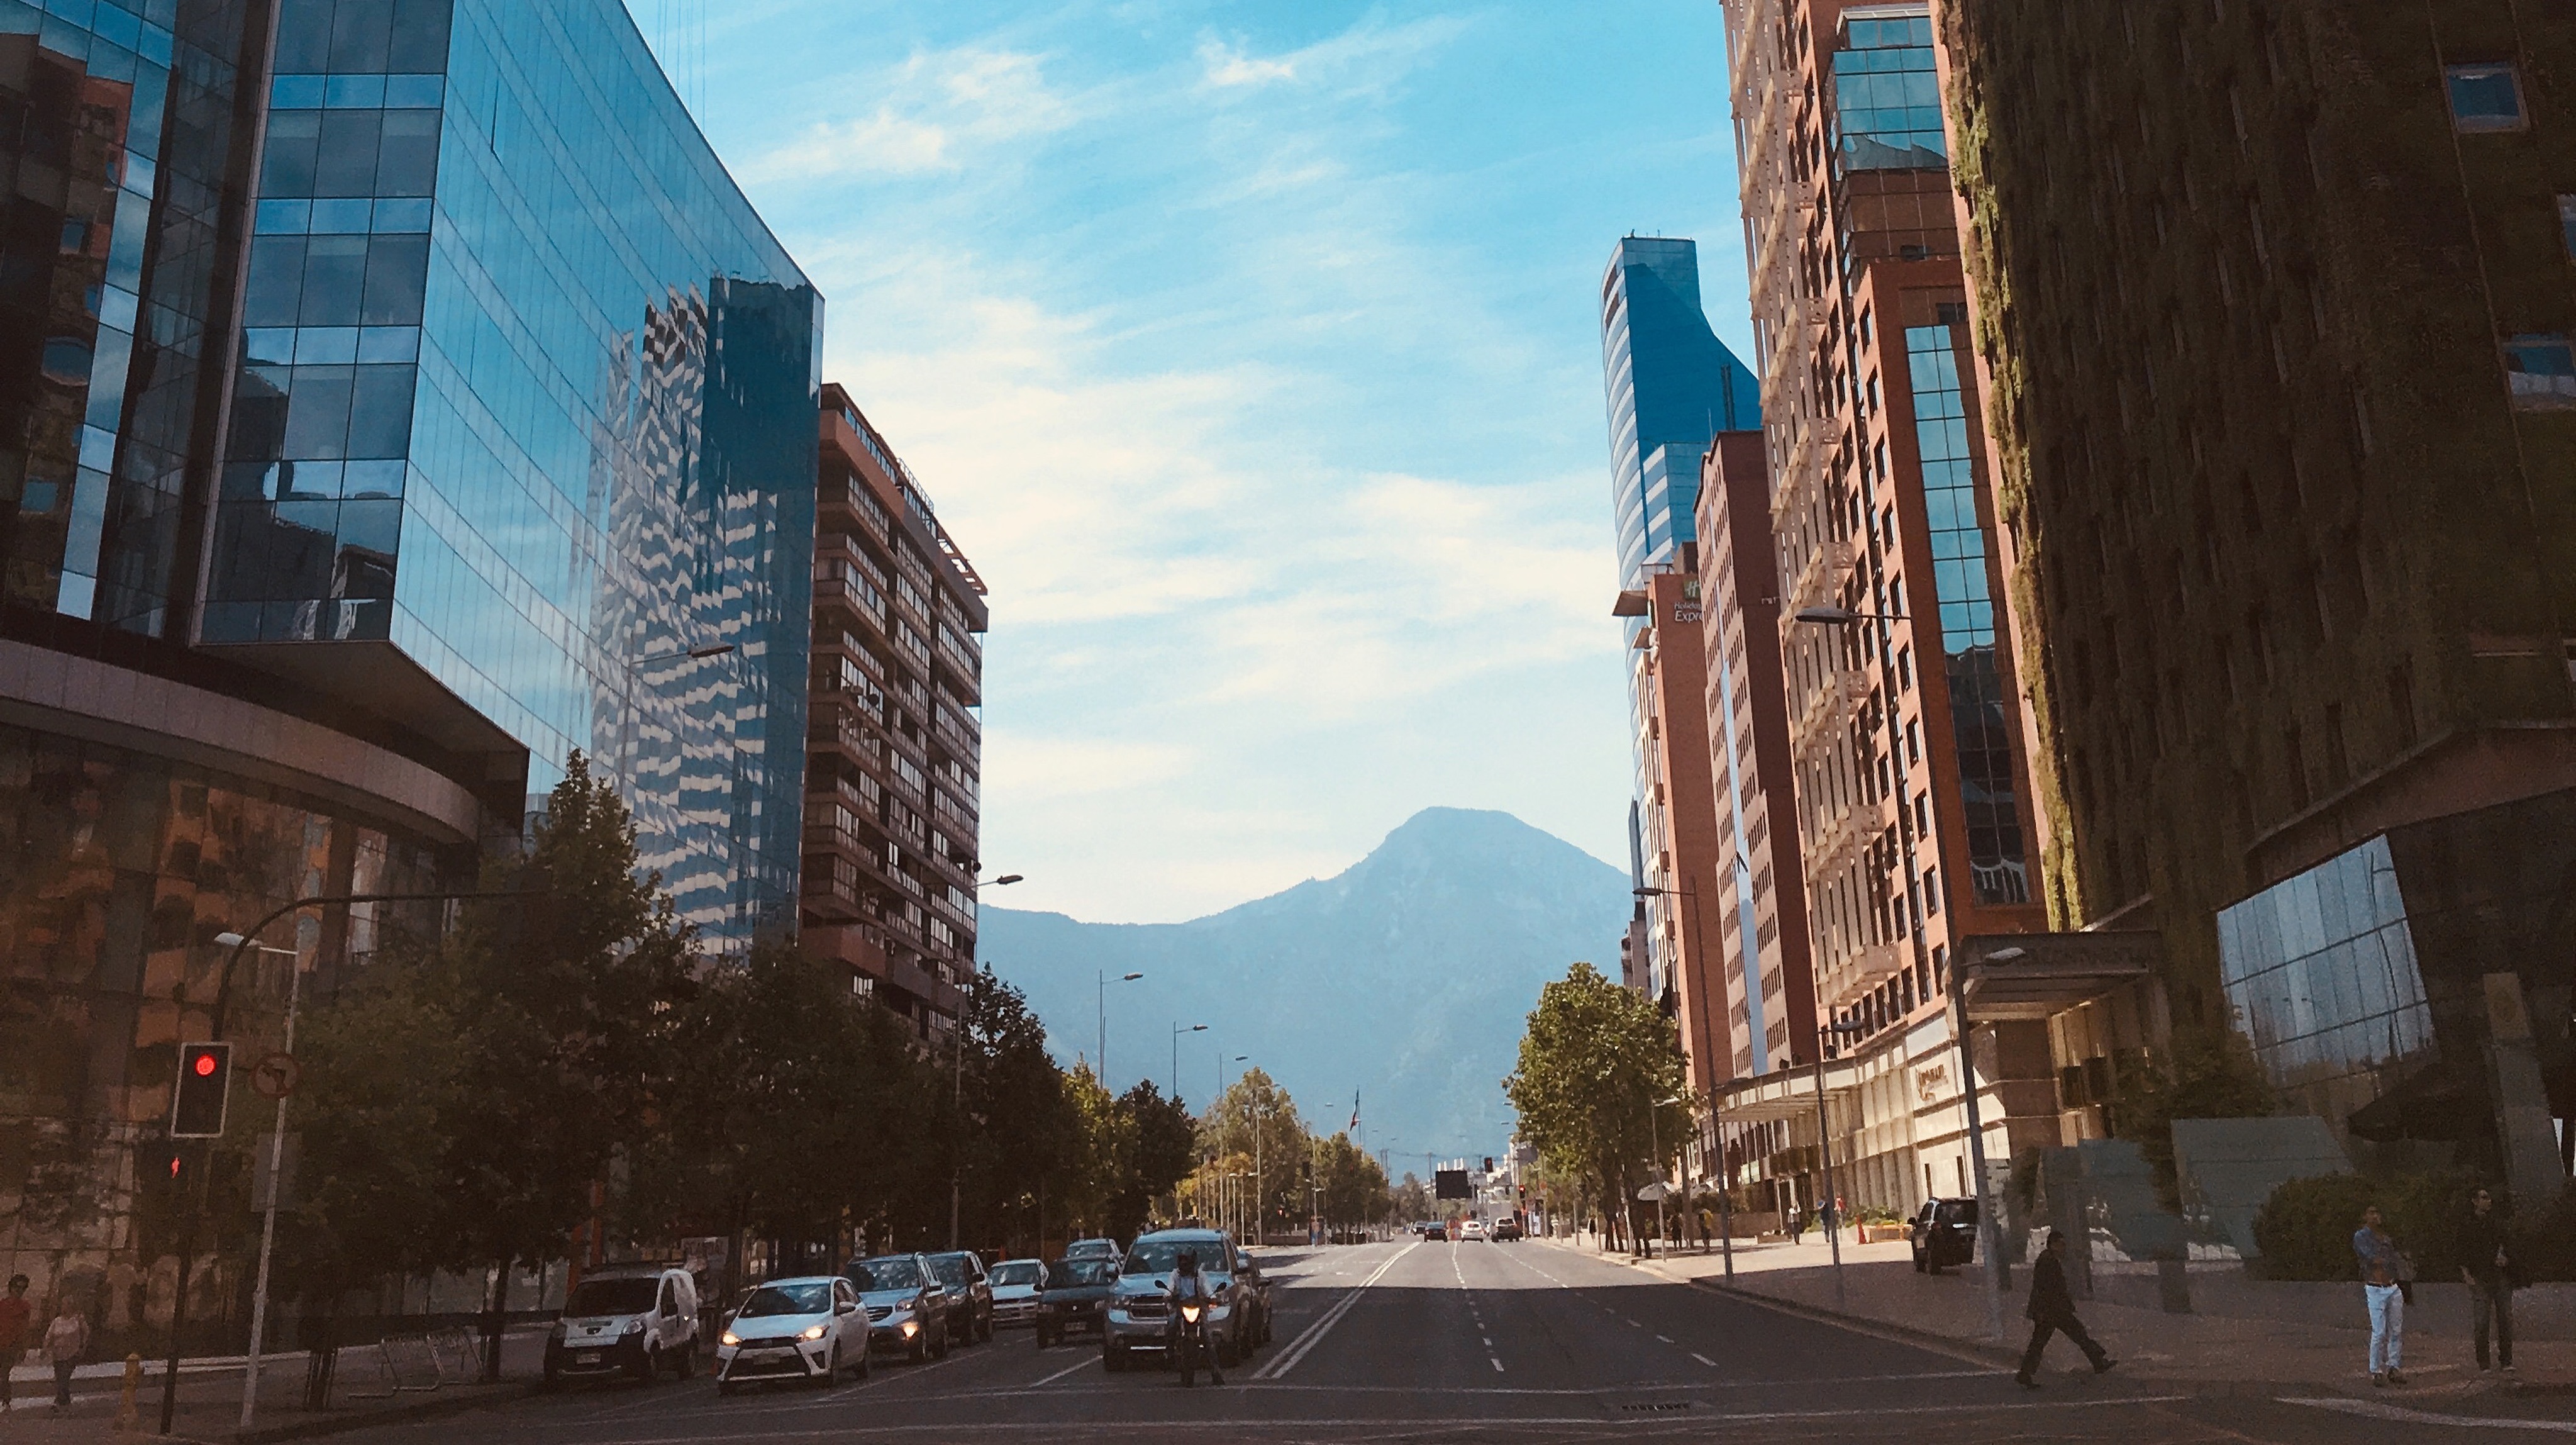 Mountains in the background with buildings lining the street